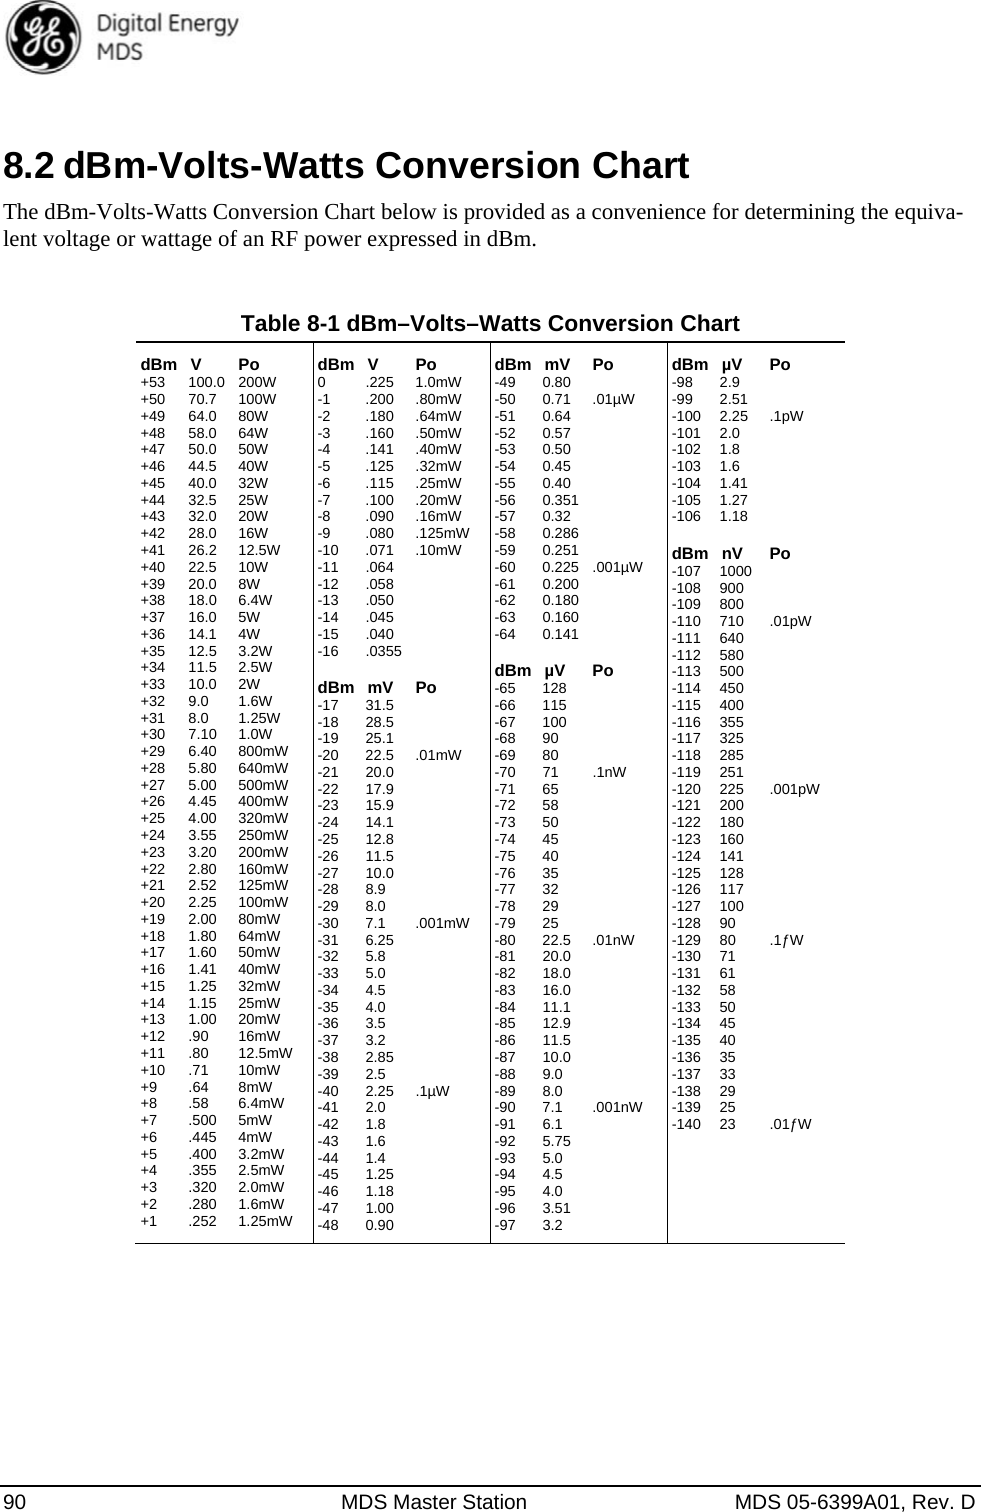  90  MDS Master Station  MDS 05-6399A01, Rev. D  8.2 dBm-Volts-Watts Conversion Chart The dBm-Volts-Watts Conversion Chart below is provided as a convenience for determining the equiva-lent voltage or wattage of an RF power expressed in dBm. Table 8-1 dBm–Volts–Watts Conversion Chart dBm V  Po +53 100.0 200W +50 70.7 100W +49 64.0 80W +48 58.0 64W +47 50.0 50W +46 44.5 40W +45 40.0 32W +44 32.5 25W +43 32.0 20W +42 28.0 16W +41 26.2 12.5W +40 22.5 10W +39 20.0 8W +38 18.0 6.4W +37 16.0 5W +36 14.1 4W +35 12.5 3.2W +34 11.5 2.5W +33 10.0 2W +32 9.0  1.6W +31 8.0  1.25W +30 7.10 1.0W +29 6.40 800mW +28 5.80 640mW +27 5.00 500mW +26 4.45 400mW +25 4.00 320mW +24 3.55 250mW +23 3.20 200mW +22 2.80 160mW +21 2.52 125mW +20 2.25 100mW +19 2.00 80mW +18 1.80 64mW +17 1.60 50mW +16 1.41 40mW +15 1.25 32mW +14 1.15 25mW +13 1.00 20mW +12 .90  16mW +11 .80  12.5mW +10 .71  10mW +9 .64 8mW +8 .58 6.4mW +7 .500 5mW +6 .445 4mW +5 .400 3.2mW +4 .355 2.5mW +3 .320 2.0mW +2 .280 1.6mW +1 .252 1.25mW dBm V  Po 0 .225 1.0mW -1 .200 .80mW -2 .180 .64mW -3 .160 .50mW -4 .141 .40mW -5 .125 .32mW -6 .115 .25mW -7 .100 .20mW -8 .090 .16mW -9 .080 .125mW -10 .071 .10mW -11 .064 -12 .058 -13 .050 -14 .045 -15 .040 -16 .0355  dBm mV  Po -17 31.5 -18 28.5 -19 25.1 -20 22.5 .01mW -21 20.0 -22 17.9 -23 15.9 -24 14.1 -25 12.8 -26 11.5 -27 10.0 -28 8.9 -29 8.0 -30 7.1  .001mW -31 6.25 -32 5.8 -33 5.0 -34 4.5 -35 4.0 -36 3.5 -37 3.2 -38 2.85 -39 2.5 -40 2.25 .1µW -41 2.0 -42 1.8 -43 1.6 -44 1.4 -45 1.25 -46 1.18 -47 1.00 -48 0.90 dBm mV  Po -49 0.80 -50 0.71 .01µW -51 0.64 -52 0.57 -53 0.50 -54 0.45 -55 0.40 -56 0.351 -57 0.32 -58 0.286 -59 0.251 -60 0.225 .001µW -61 0.200 -62 0.180 -63 0.160 -64 0.141  dBm µV  Po -65 128 -66 115 -67 100 -68 90 -69 80 -70 71  .1nW -71 65 -72 58 -73 50 -74 45 -75 40 -76 35 -77 32 -78 29 -79 25 -80 22.5 .01nW -81 20.0 -82 18.0 -83 16.0 -84 11.1 -85 12.9 -86 11.5 -87 10.0 -88 9.0 -89 8.0 -90 7.1  .001nW -91 6.1 -92 5.75 -93 5.0 -94 4.5 -95 4.0 -96 3.51 -97 3.2 dBm µV  Po -98 2.9 -99 2.51 -100 2.25  .1pW -101 2.0 -102 1.8 -103 1.6 -104 1.41 -105 1.27 -106 1.18  dBm nV  Po -107 1000 -108 900 -109 800 -110 710  .01pW -111 640 -112 580 -113 500 -114 450 -115 400 -116 355 -117 325 -118 285 -119 251 -120 225  .001pW -121 200 -122 180 -123 160 -124 141 -125 128 -126 117 -127 100 -128 90 -129 80  .1ƒW -130 71 -131 61 -132 58 -133 50 -134 45 -135 40 -136 35 -137 33 -138 29 -139 25 -140 23  .01ƒW  